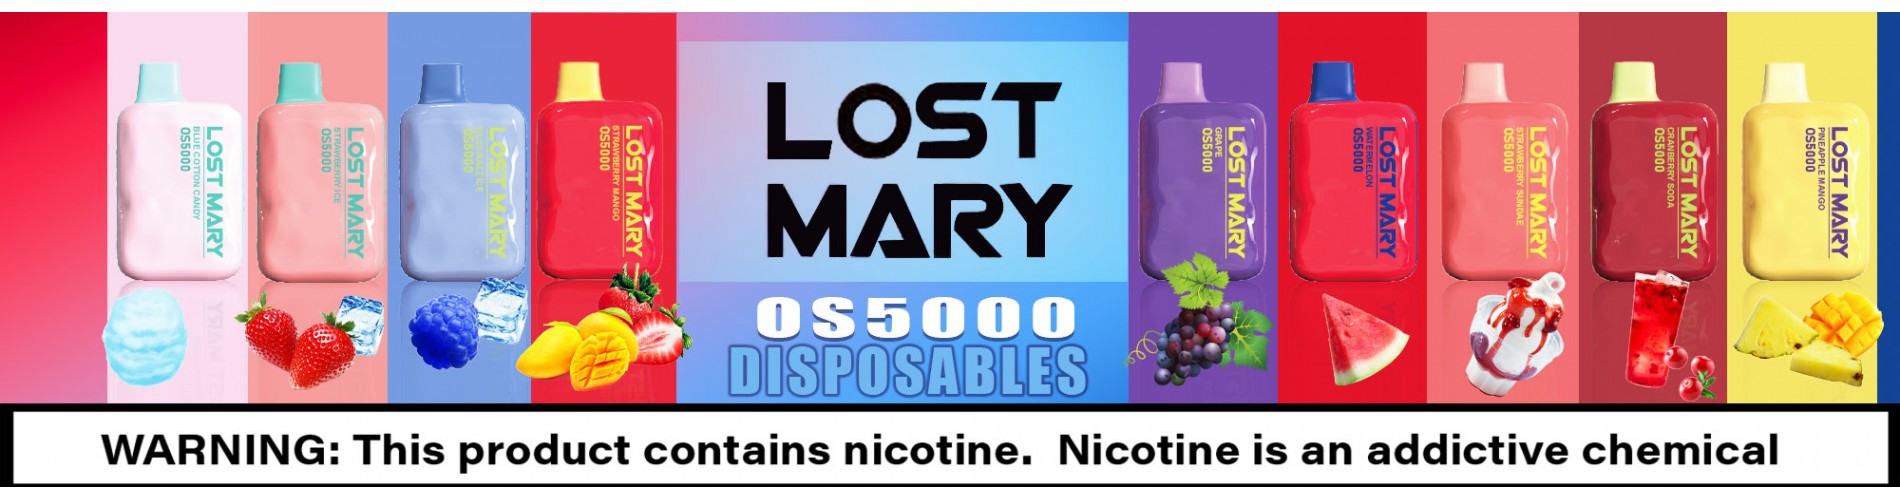 Lost Mary Disposables, SO5000 Puffs Elf Bar